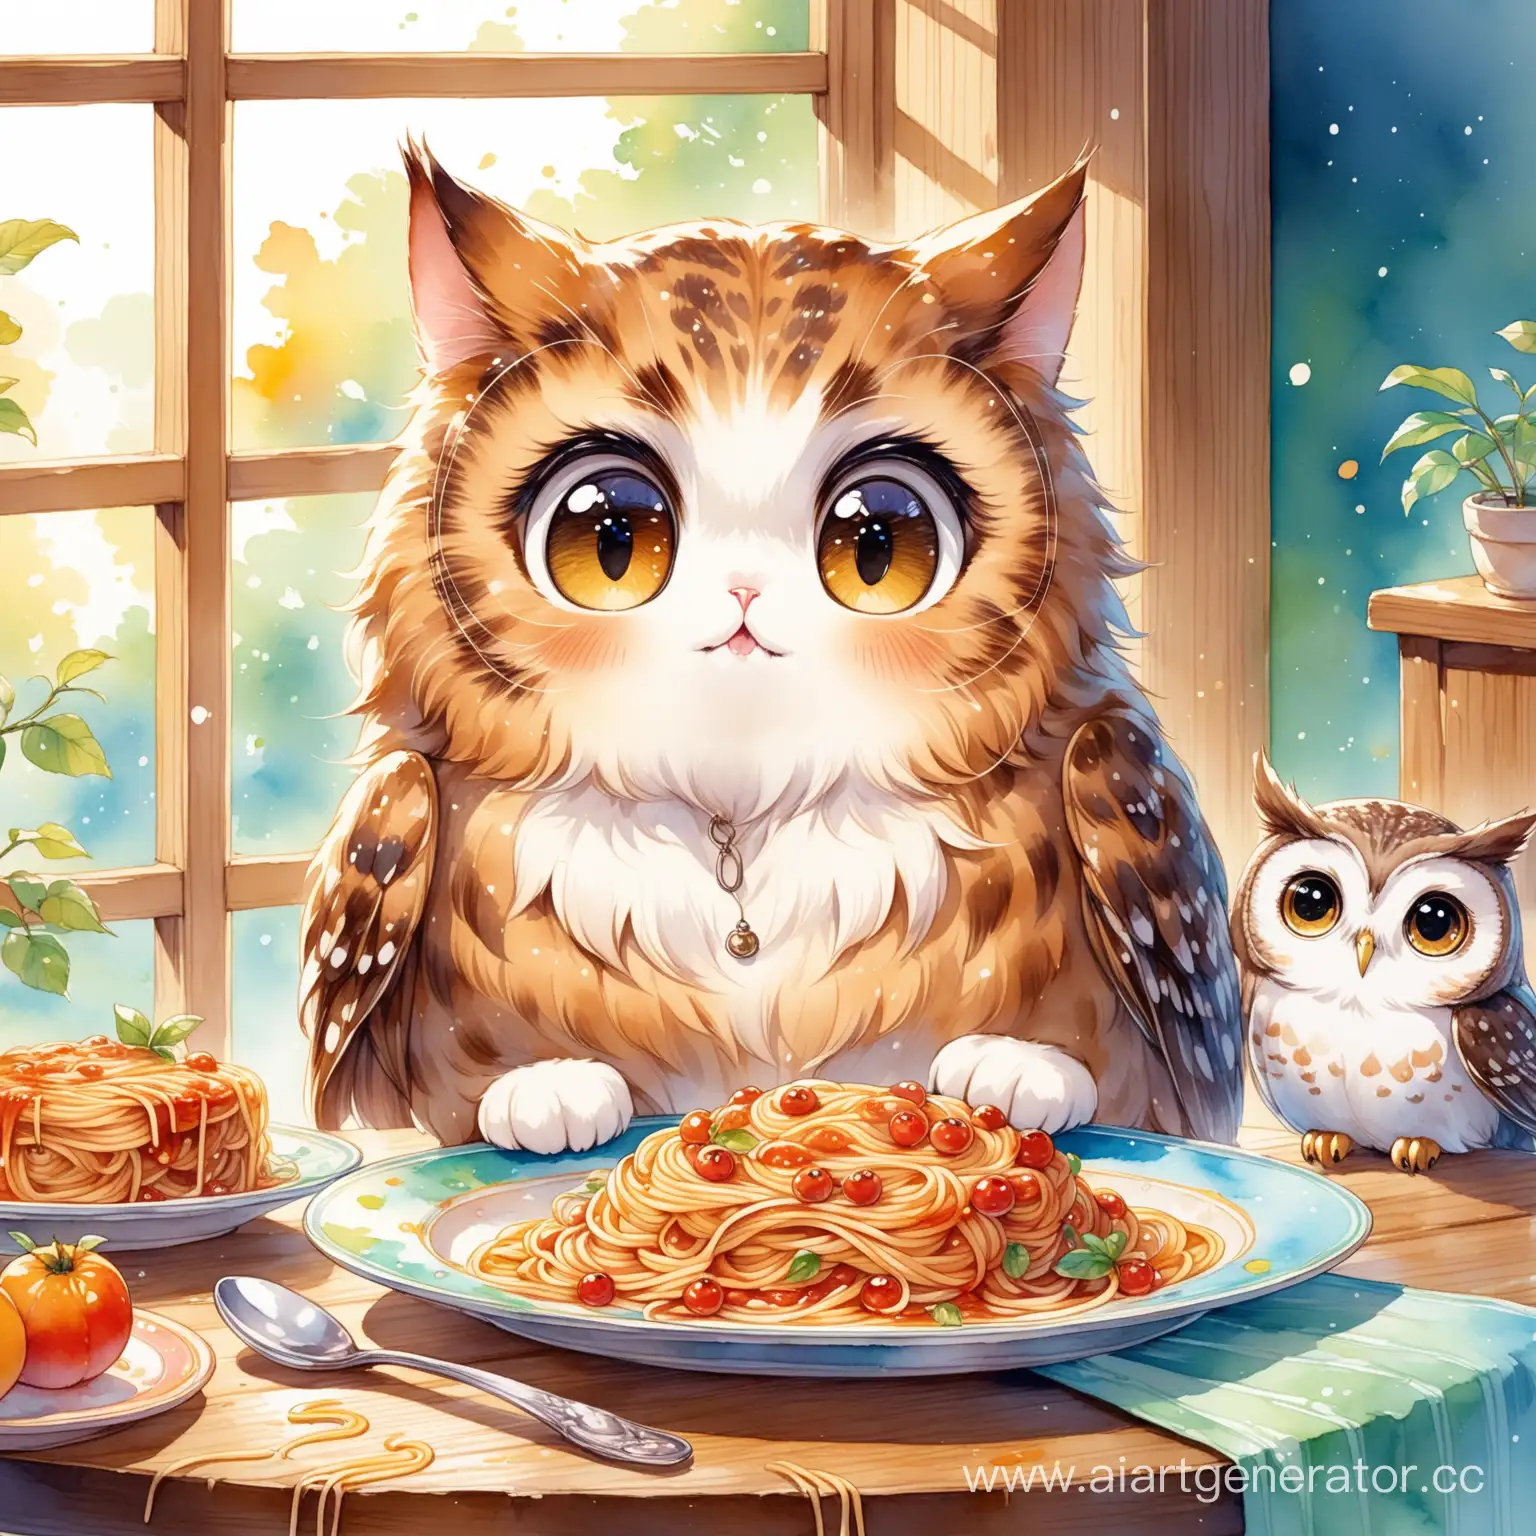 (masterpiece, high detailed art, digital art:1.3), adorable cat enjoying spaghetti from a plate on a table, watercolor splash paint style reminiscent of Yi Inmun's work, (big cute eyes:1.2), fluffy grey fur, delicate whiskers, playful demeanor, cute owl perched nearby, wide-eyed and curious, intricate details on the spaghetti strands, colorful plate, textured wooden table, soft lighting casting warm shadows, whimsical and charming atmosphere, artful splashes of watercolor adding a dreamy quality, playful interaction between the cat and owl, heartwarming scene captured in a detailed and enchanting style.